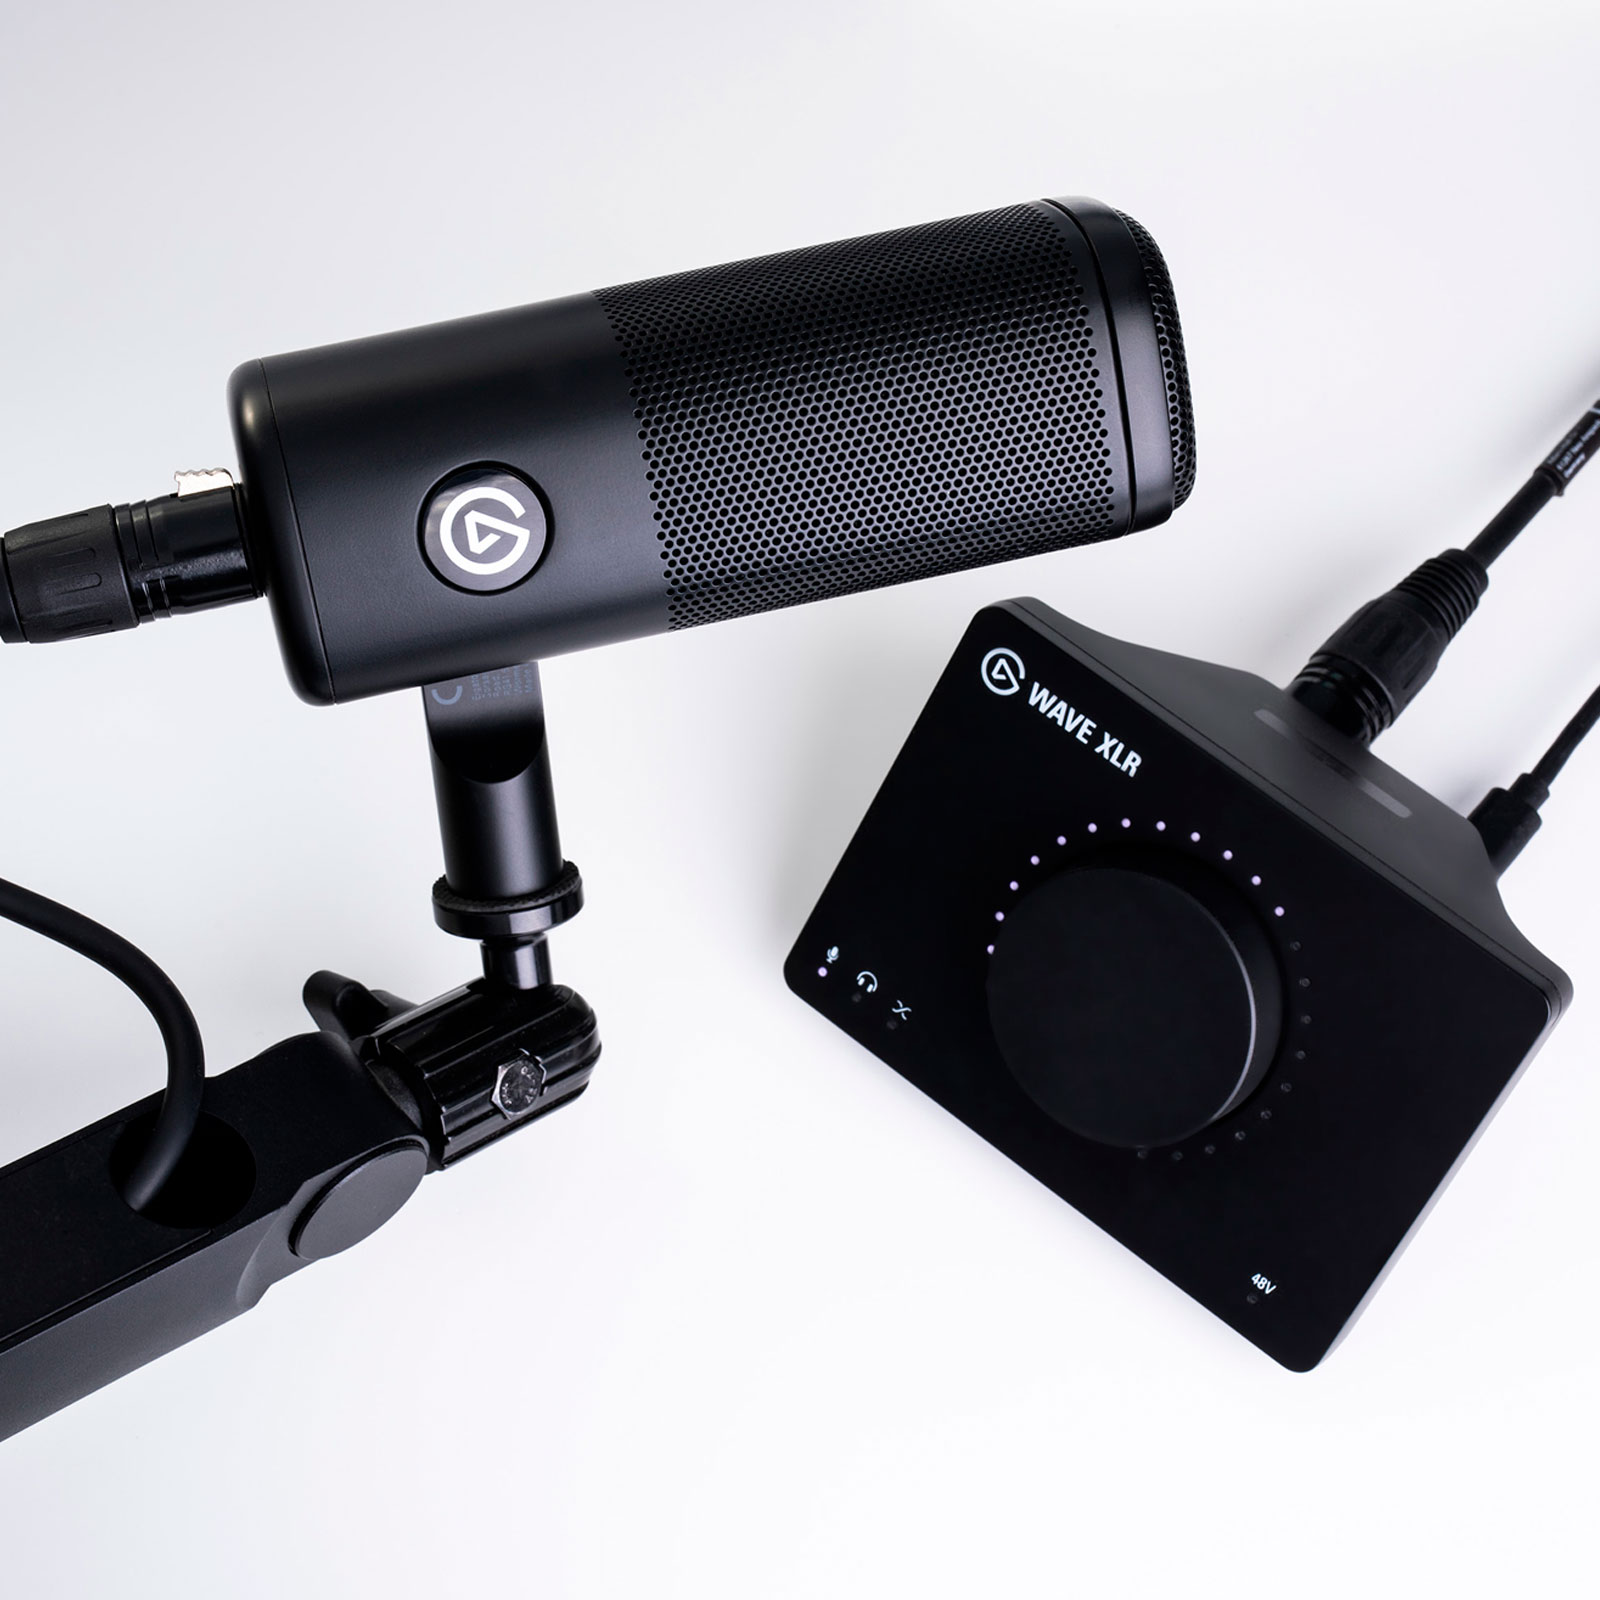 Elgato Wave DX and Wave XLR Unboxing and Test Audio 